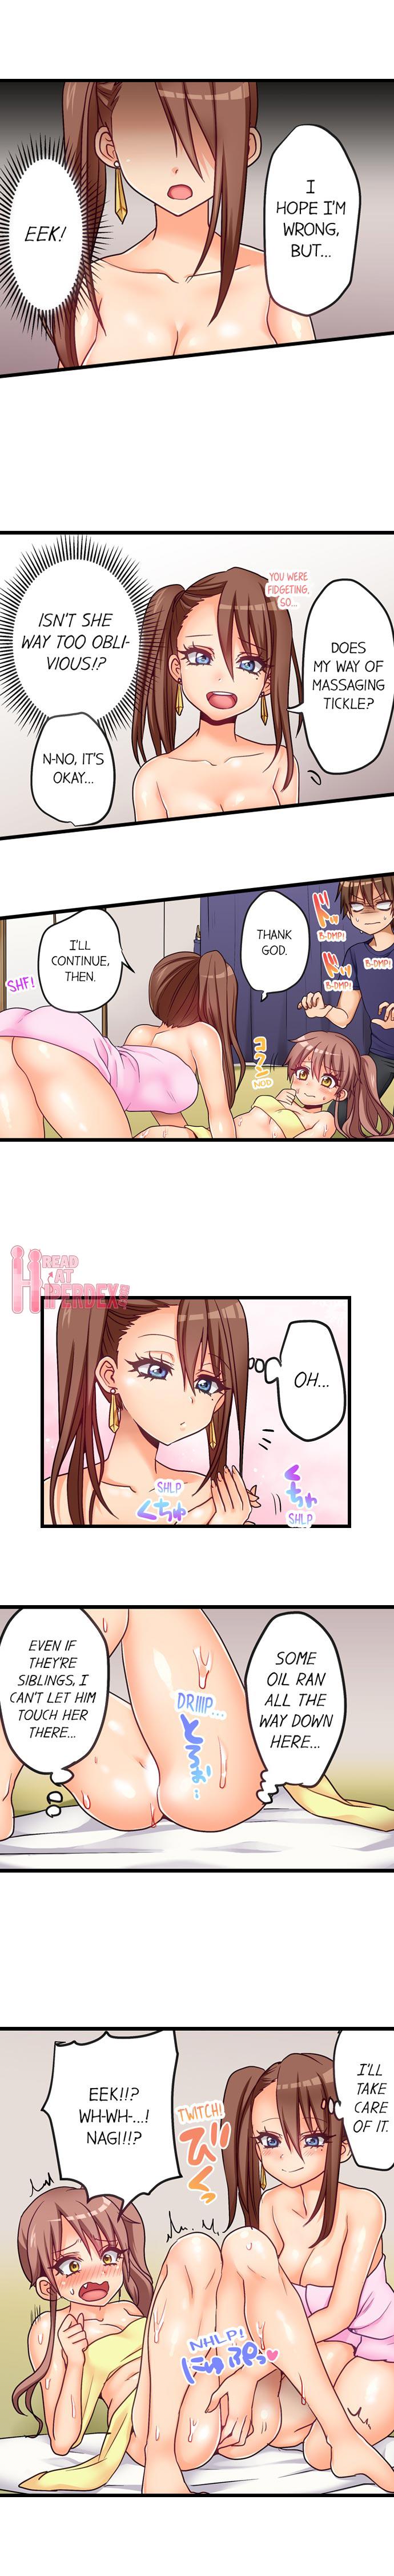 Breeding Porori] My First Time is with.... My Little Sister?! - Original Facial Cumshot - Page 5